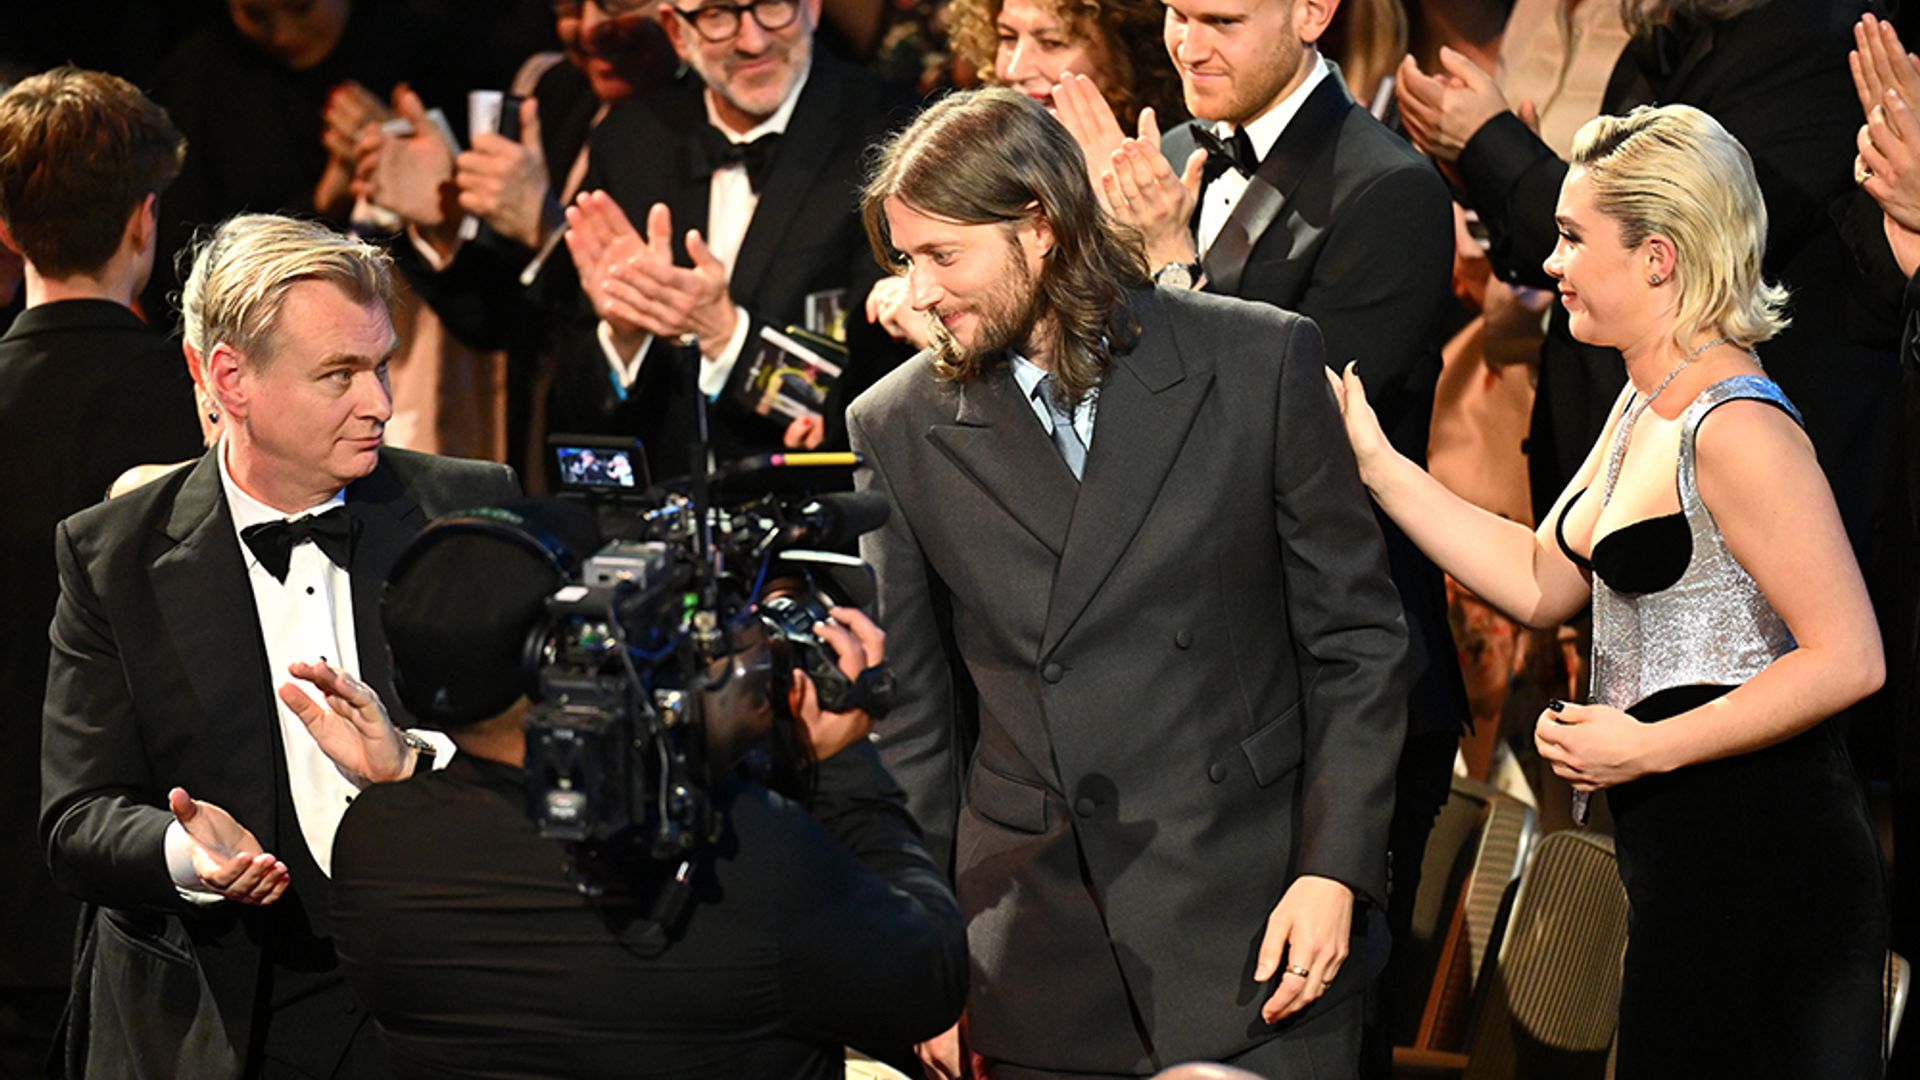 Swedish composer Ludwig Göransson was congratulated by his Oppenheimer family after winning the award for Best Original Score